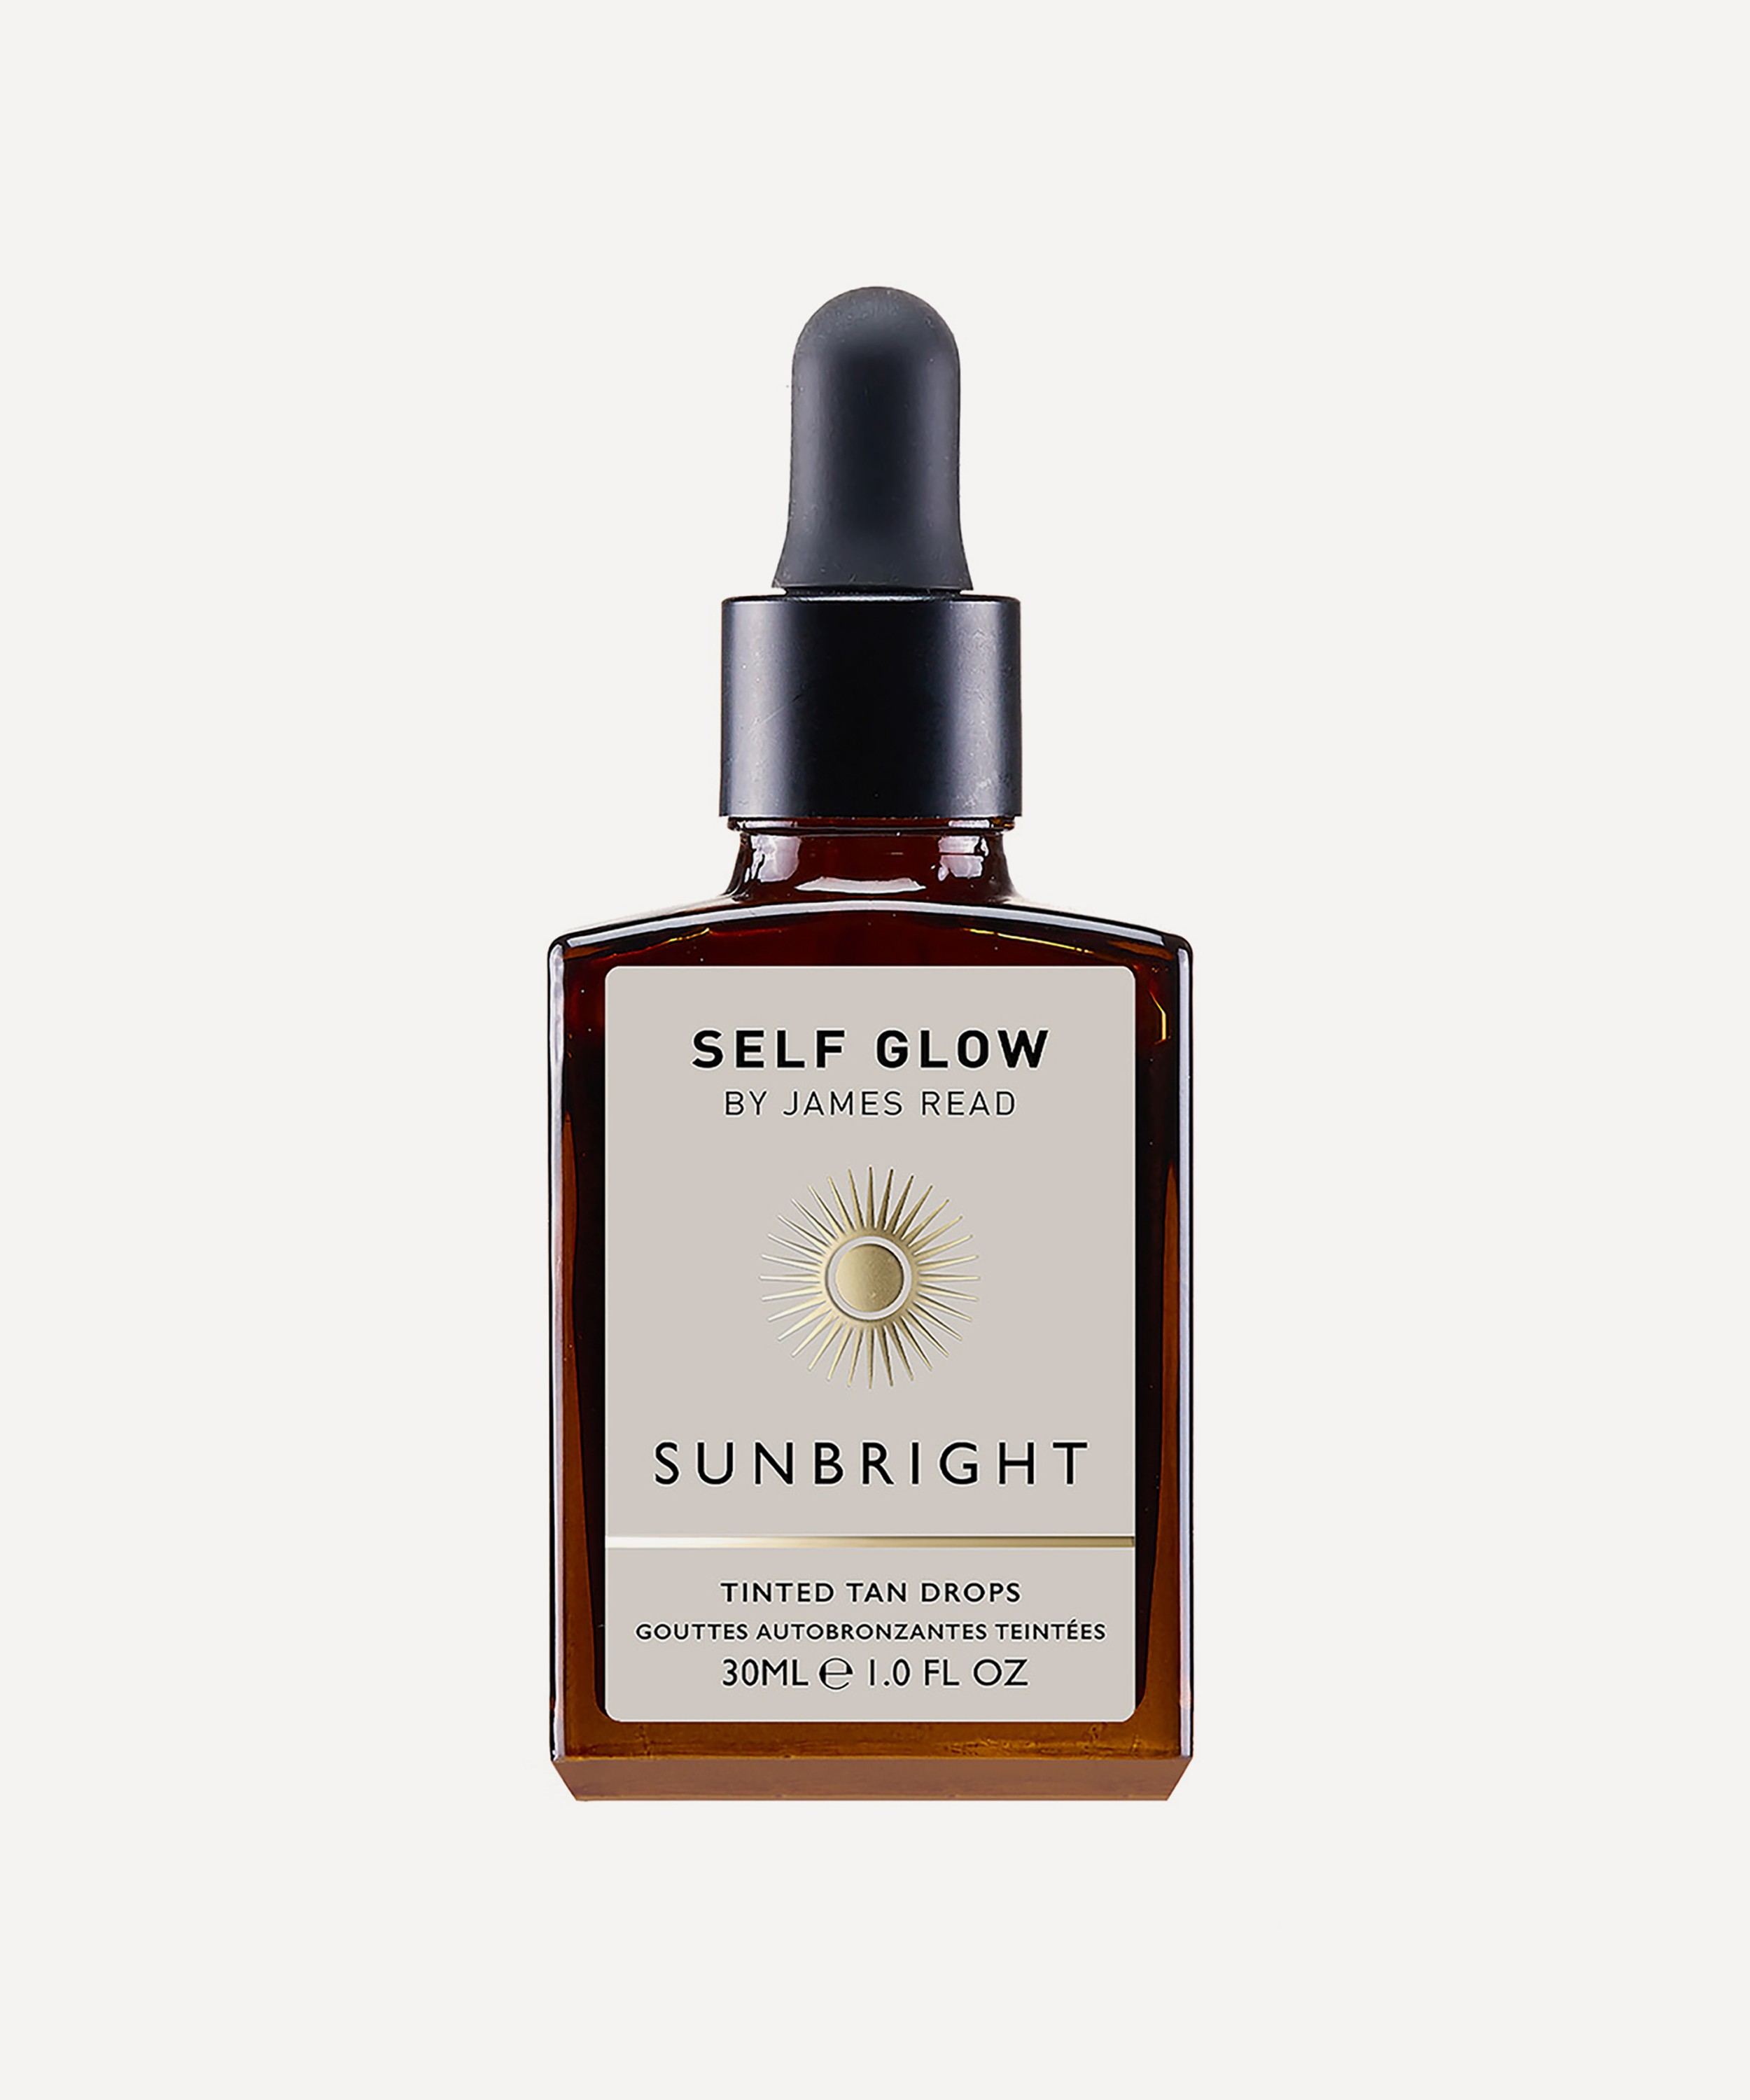 Self Glow by James Read - Sunbright Tinted Tan Drops 30ml